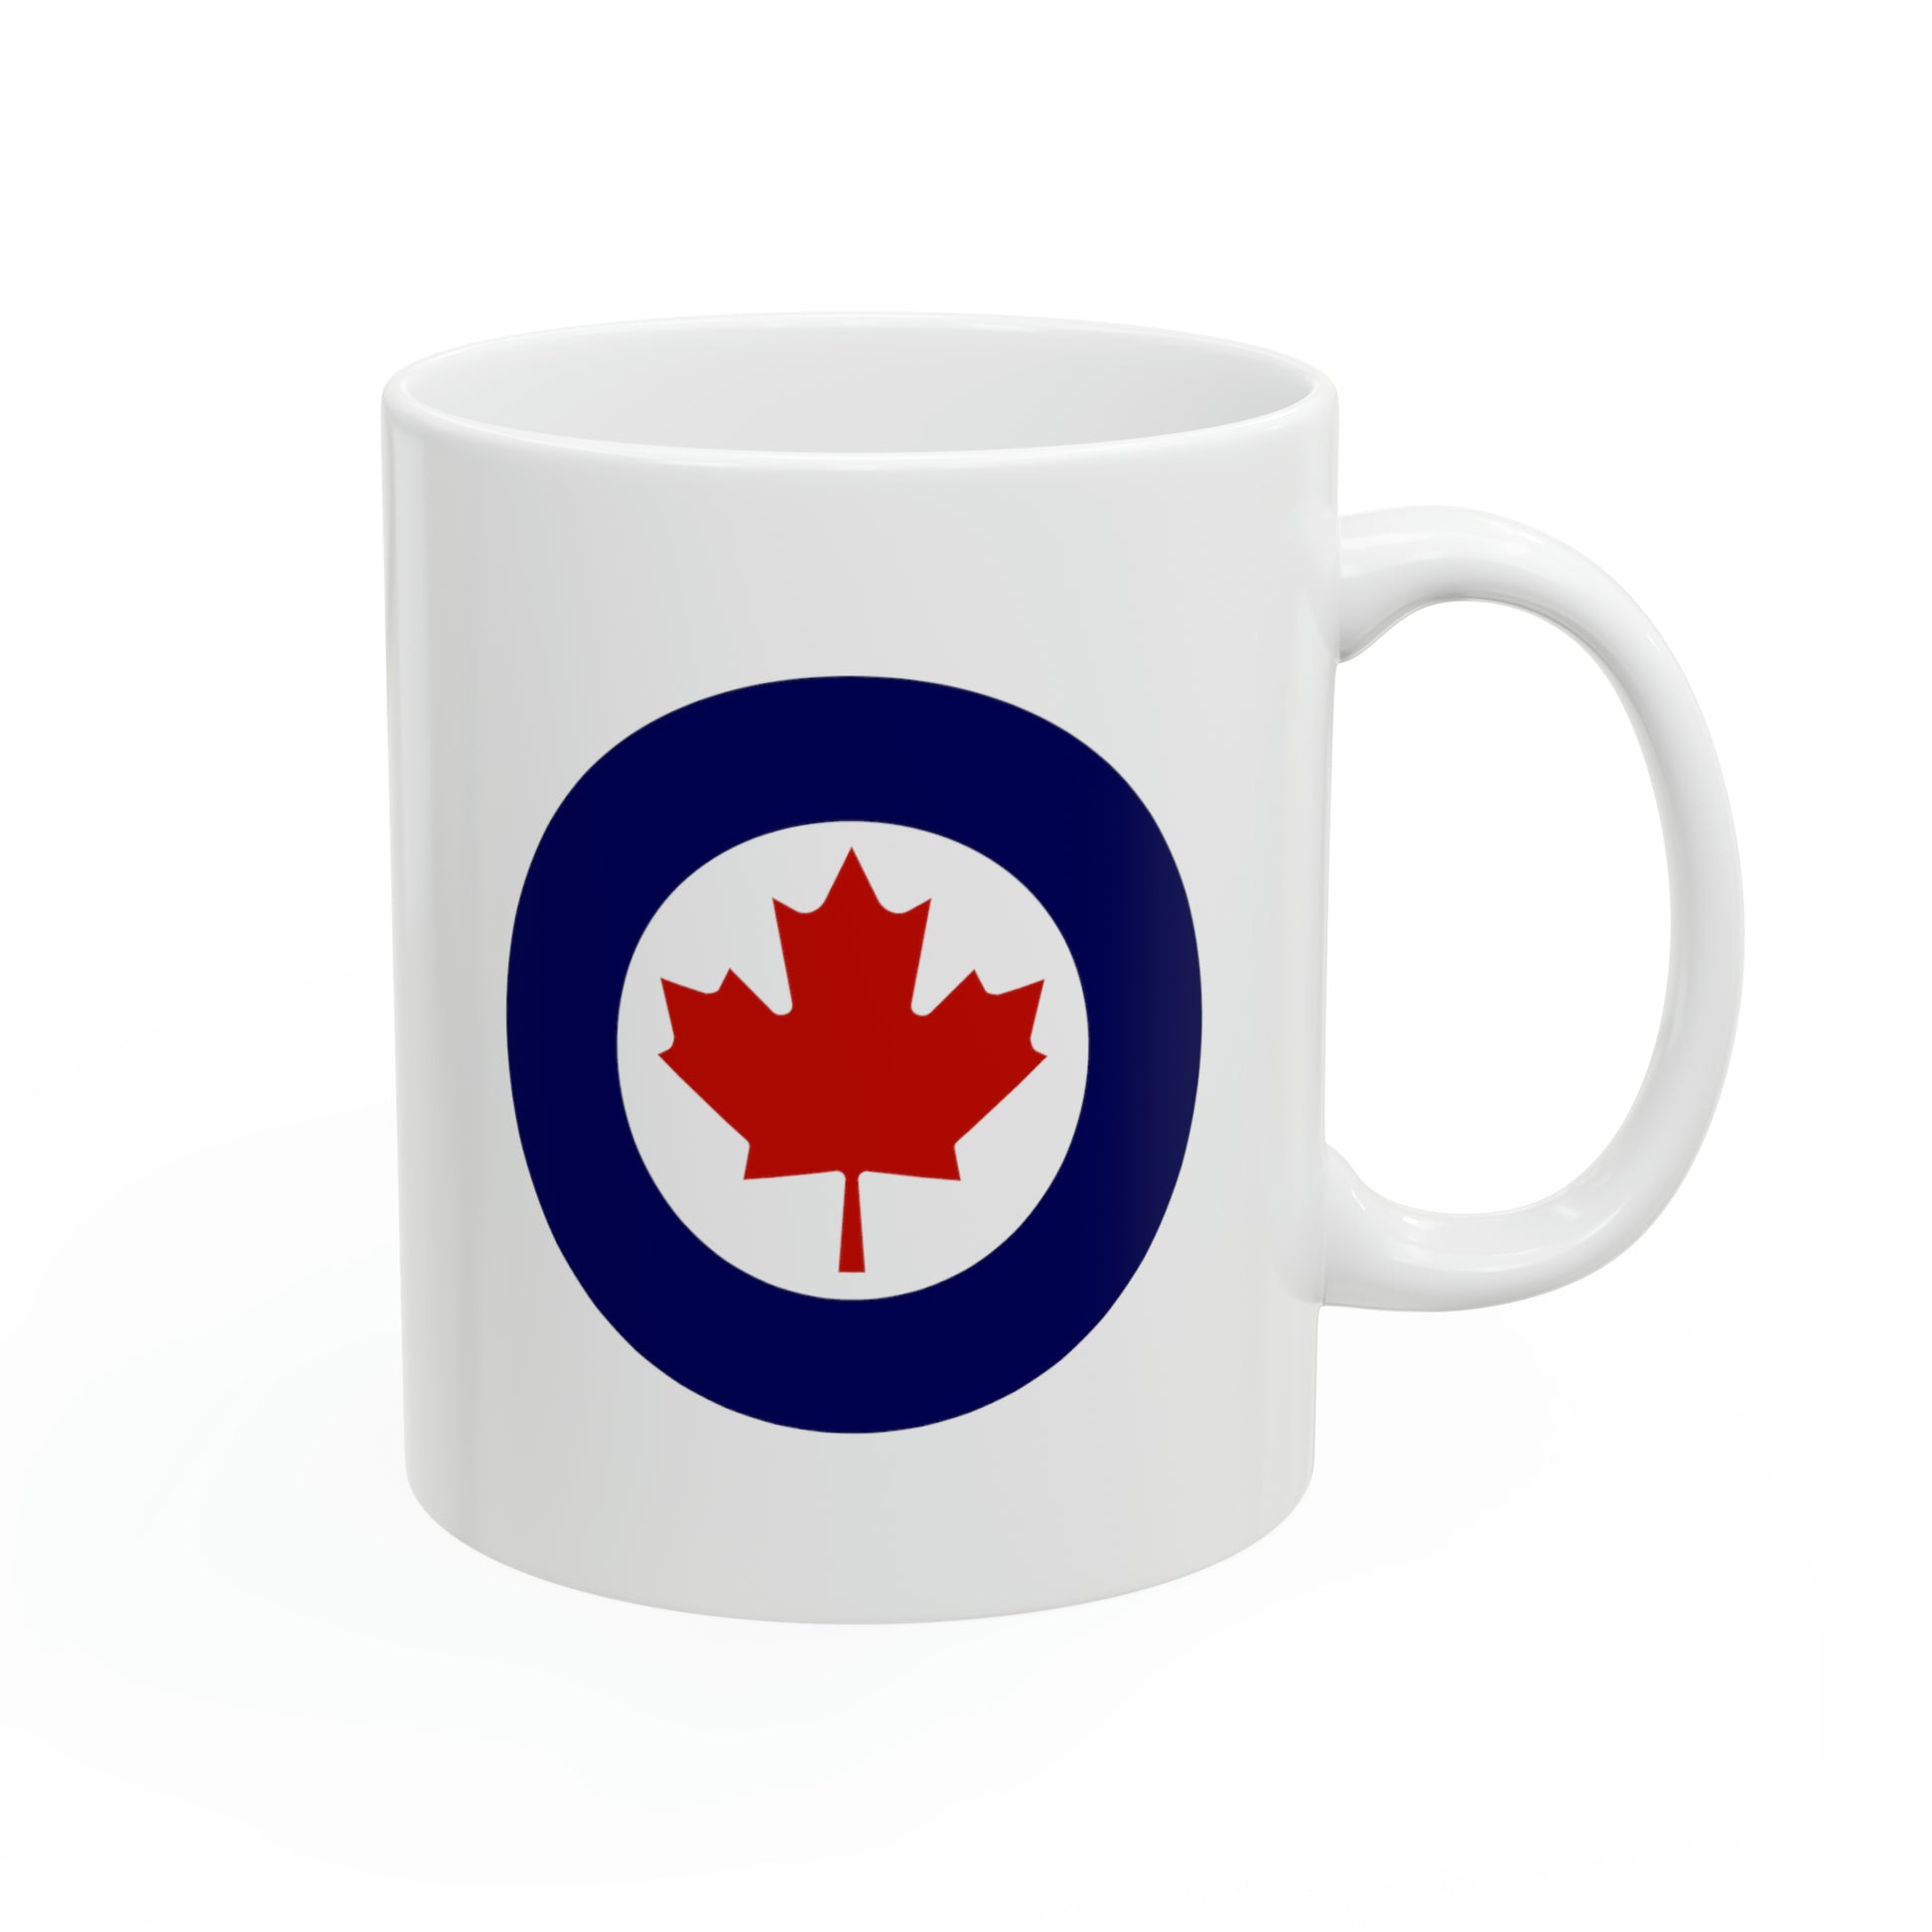 Canadian Air Force Roundel Coffee Mug - Double Sided White Ceramic 11oz - By TheGlassyLass.com